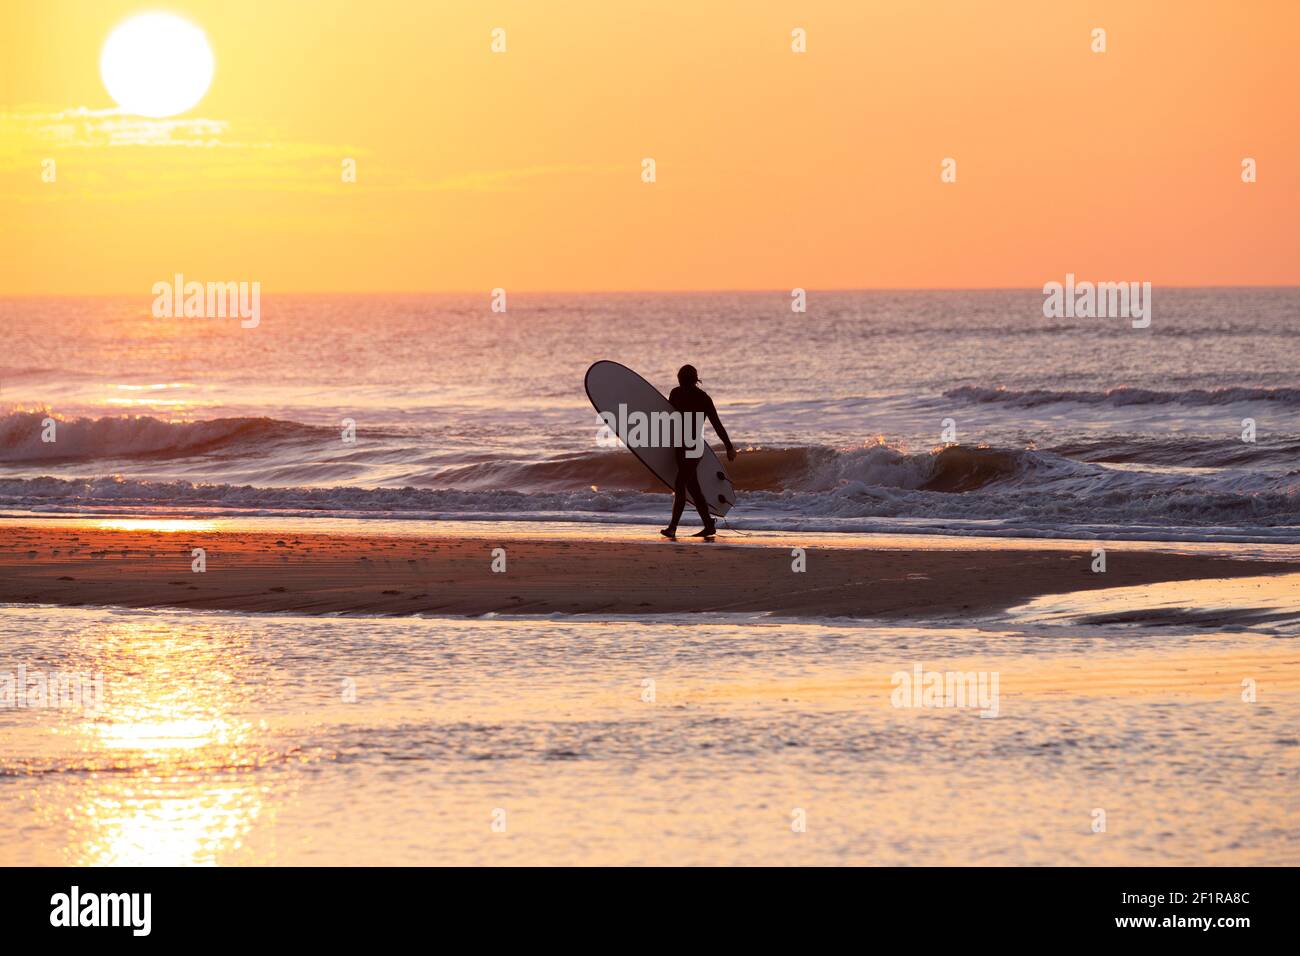 A surfer walking along the beach at sunset Stock Photo